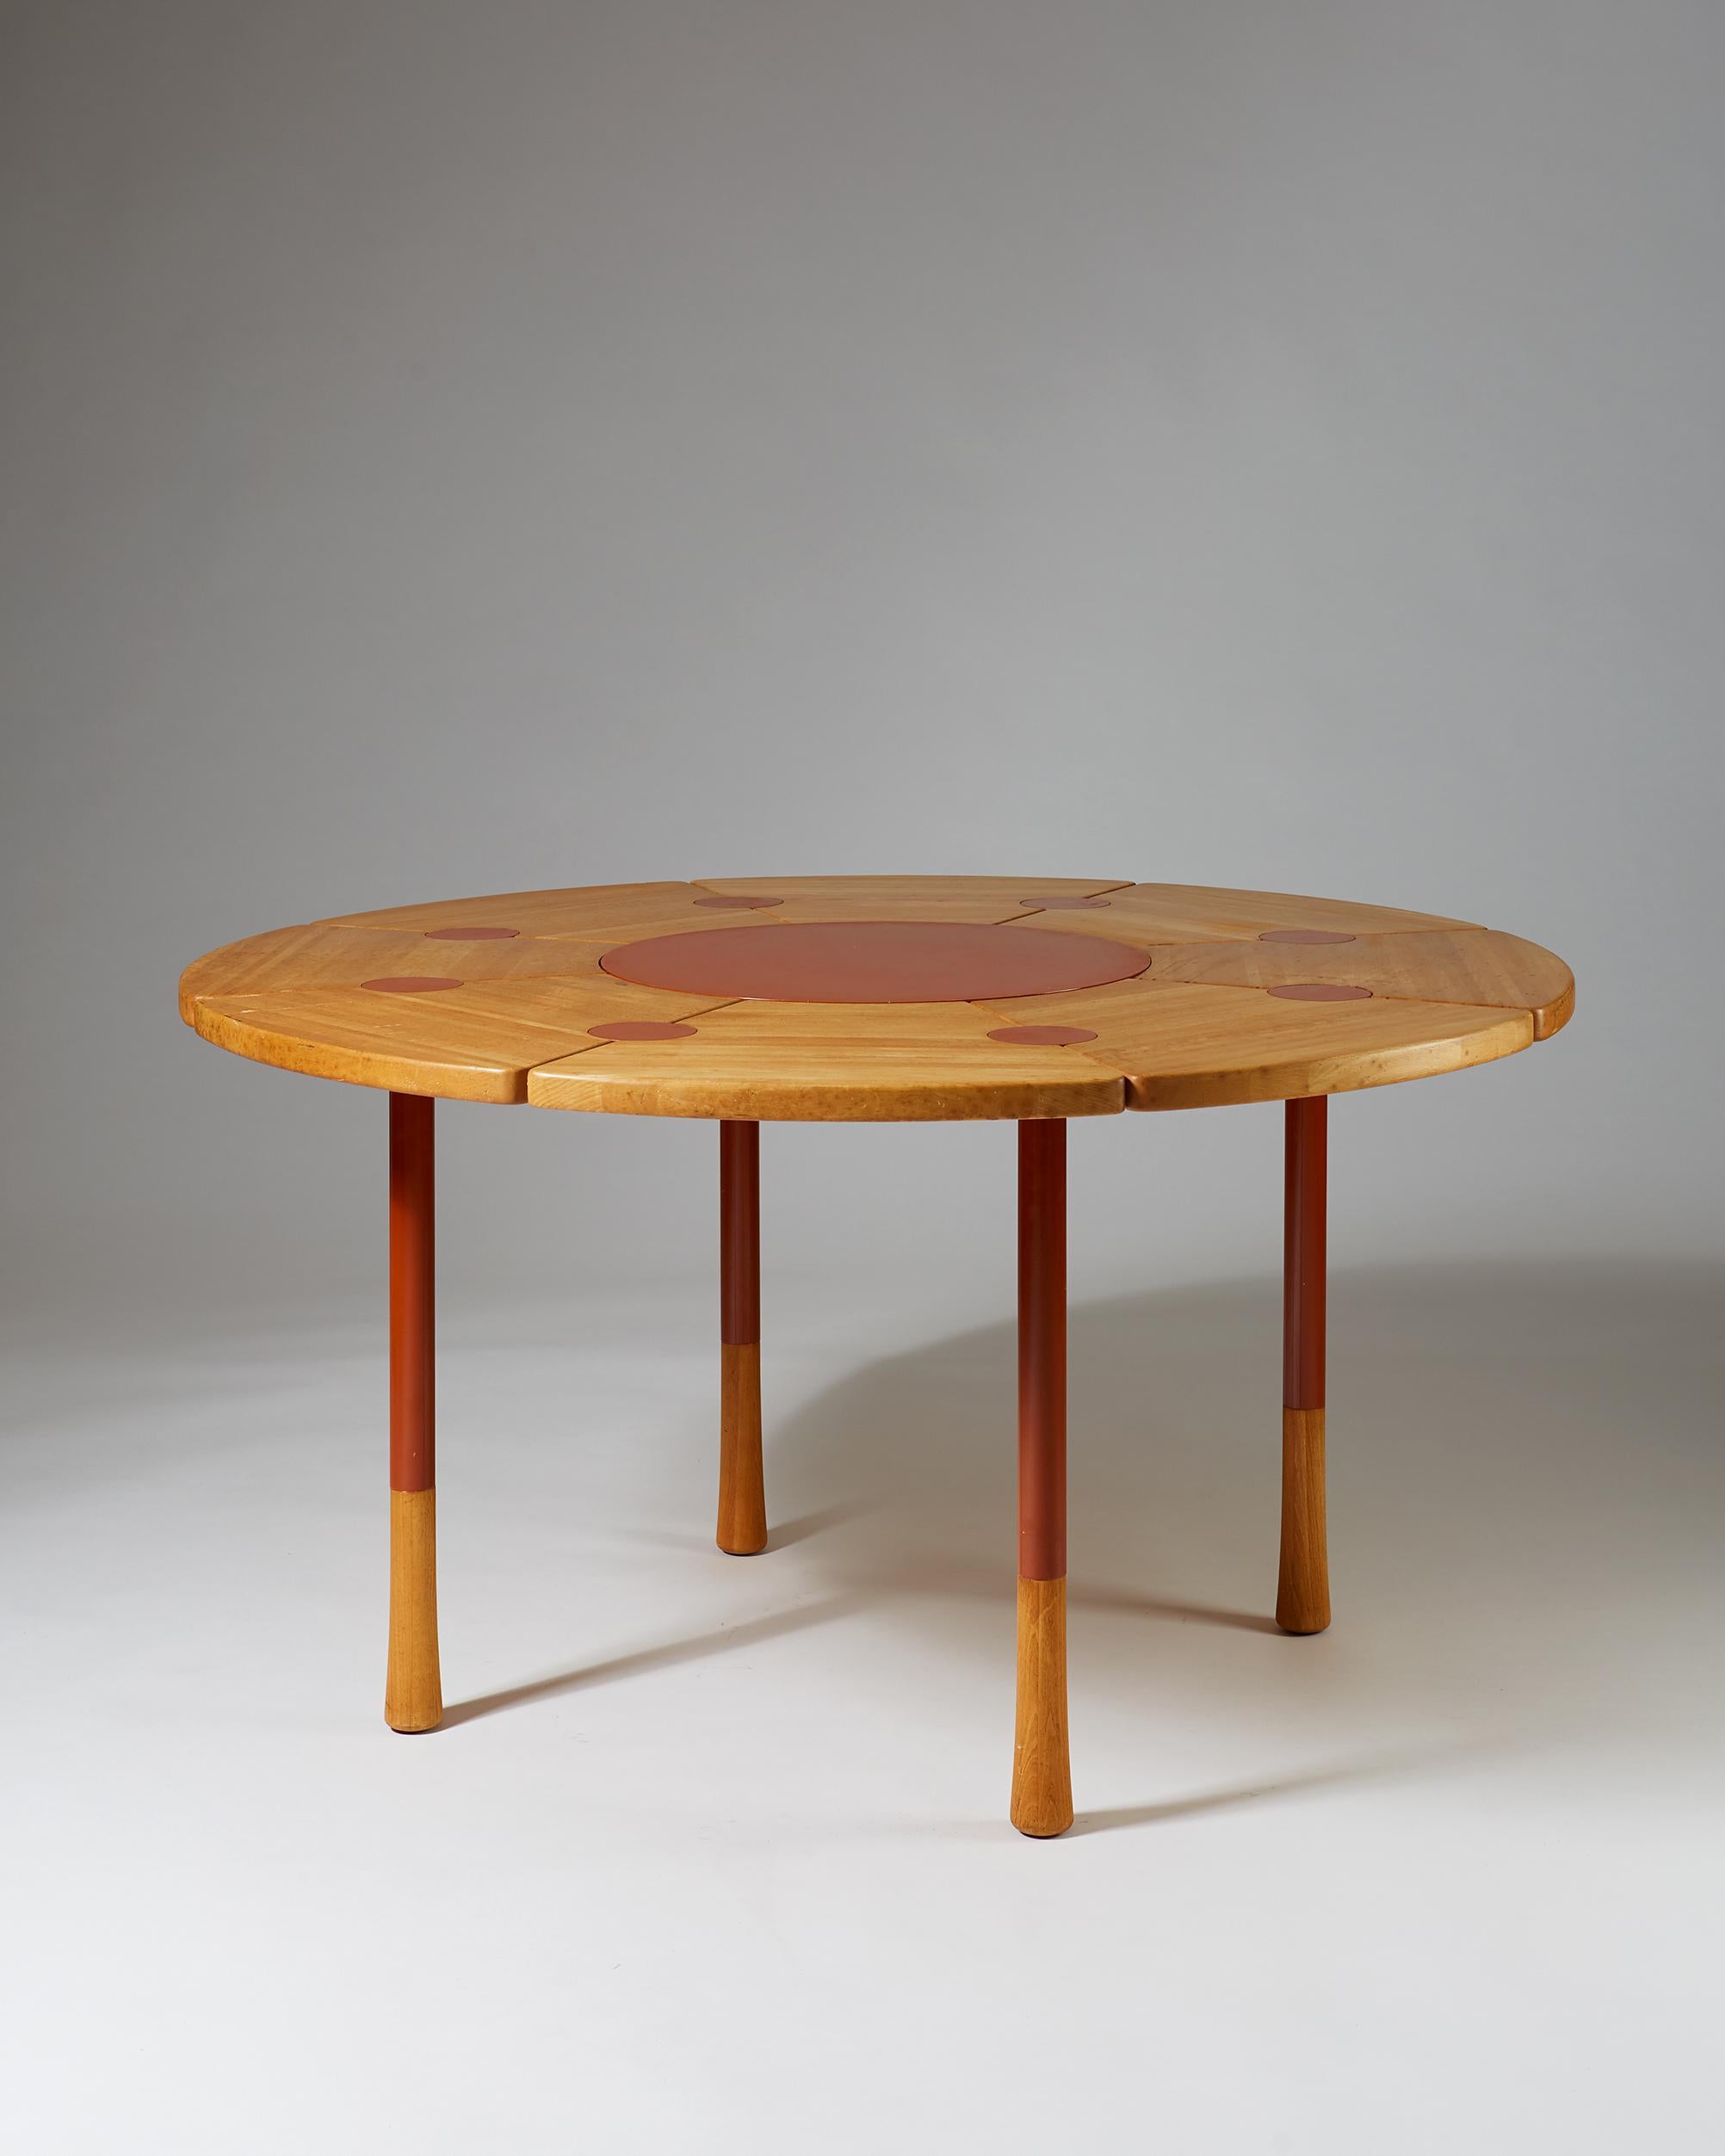 Dining table designed by Richard Nissen, 
Denmark.

Beech with metal inlays.

Measures: H 73 cm/ 2' 5 1/2''
D 140 cm/ 4' 7 5/8'.